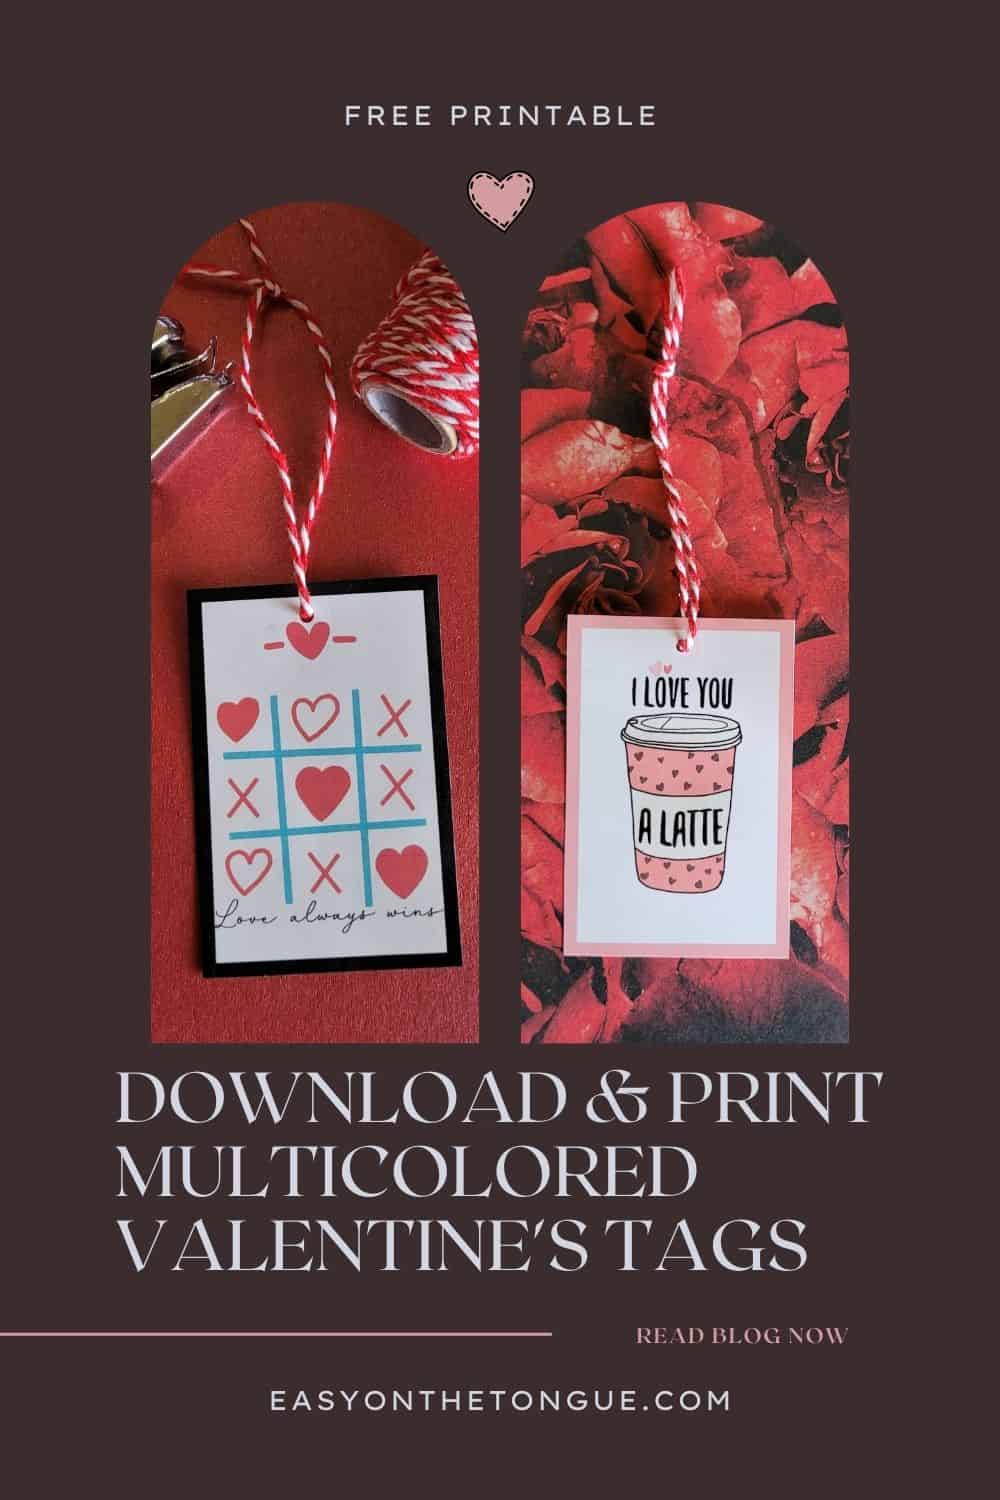 Free Multocolored valentines day gift tags available on easyonthetongue.com  Download and Print Free Multicolored Valentines Tags